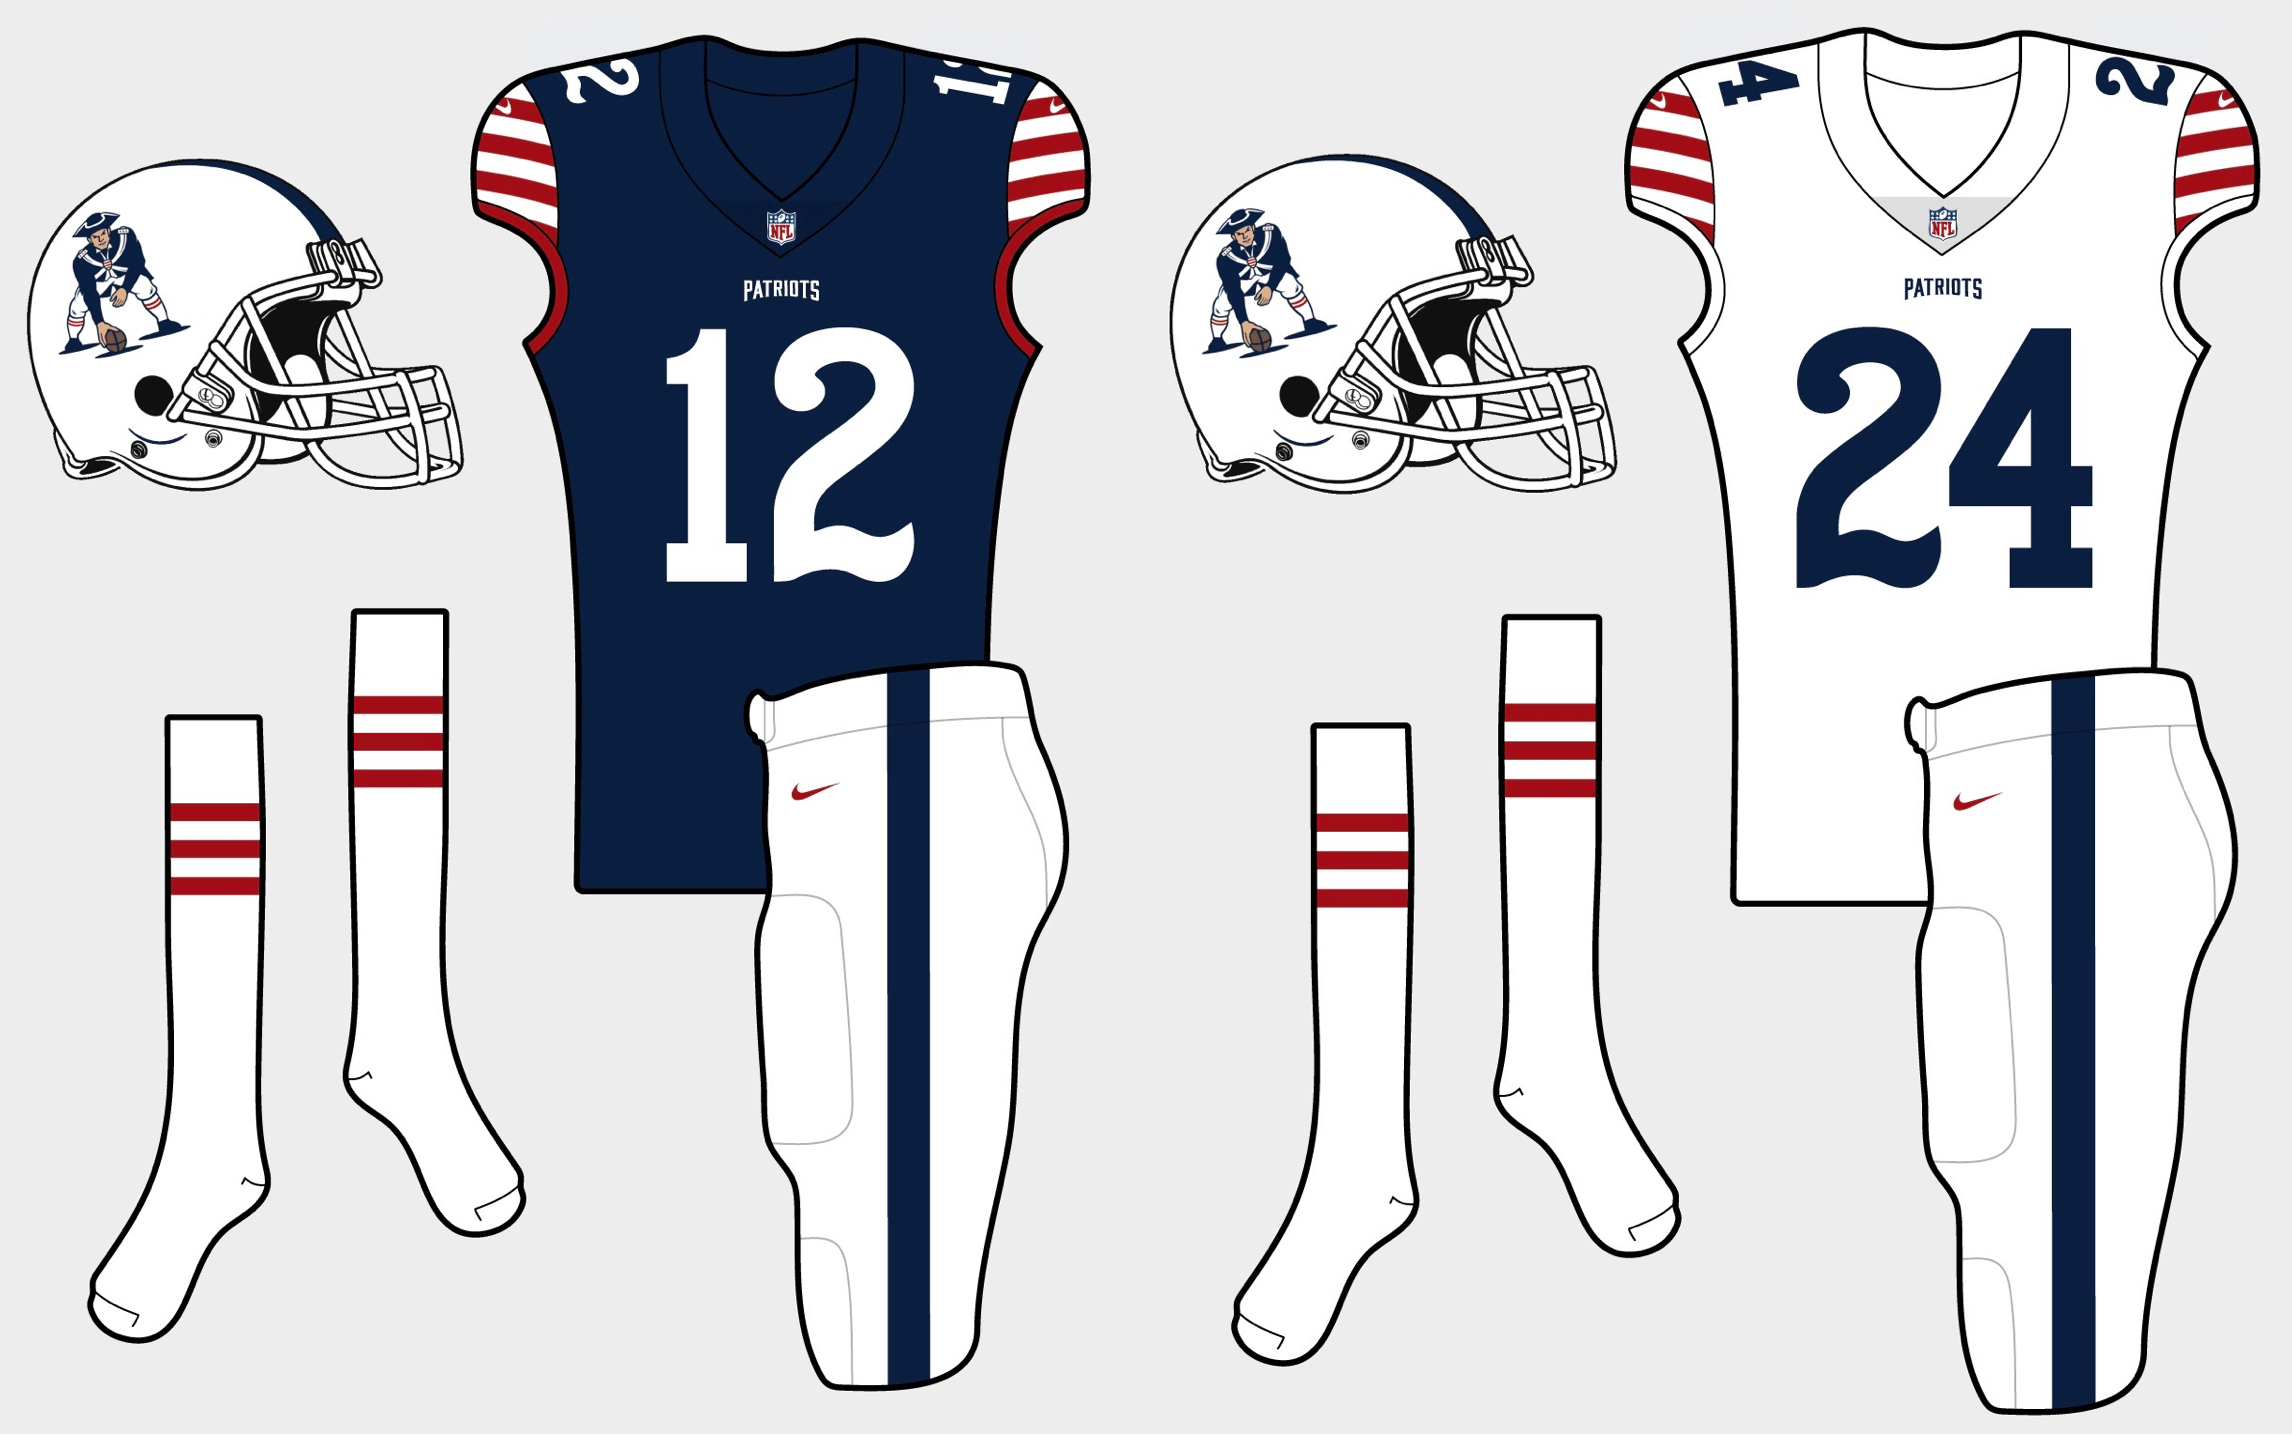 Should Bengals follow Patriots, redesign jerseys with color rush?